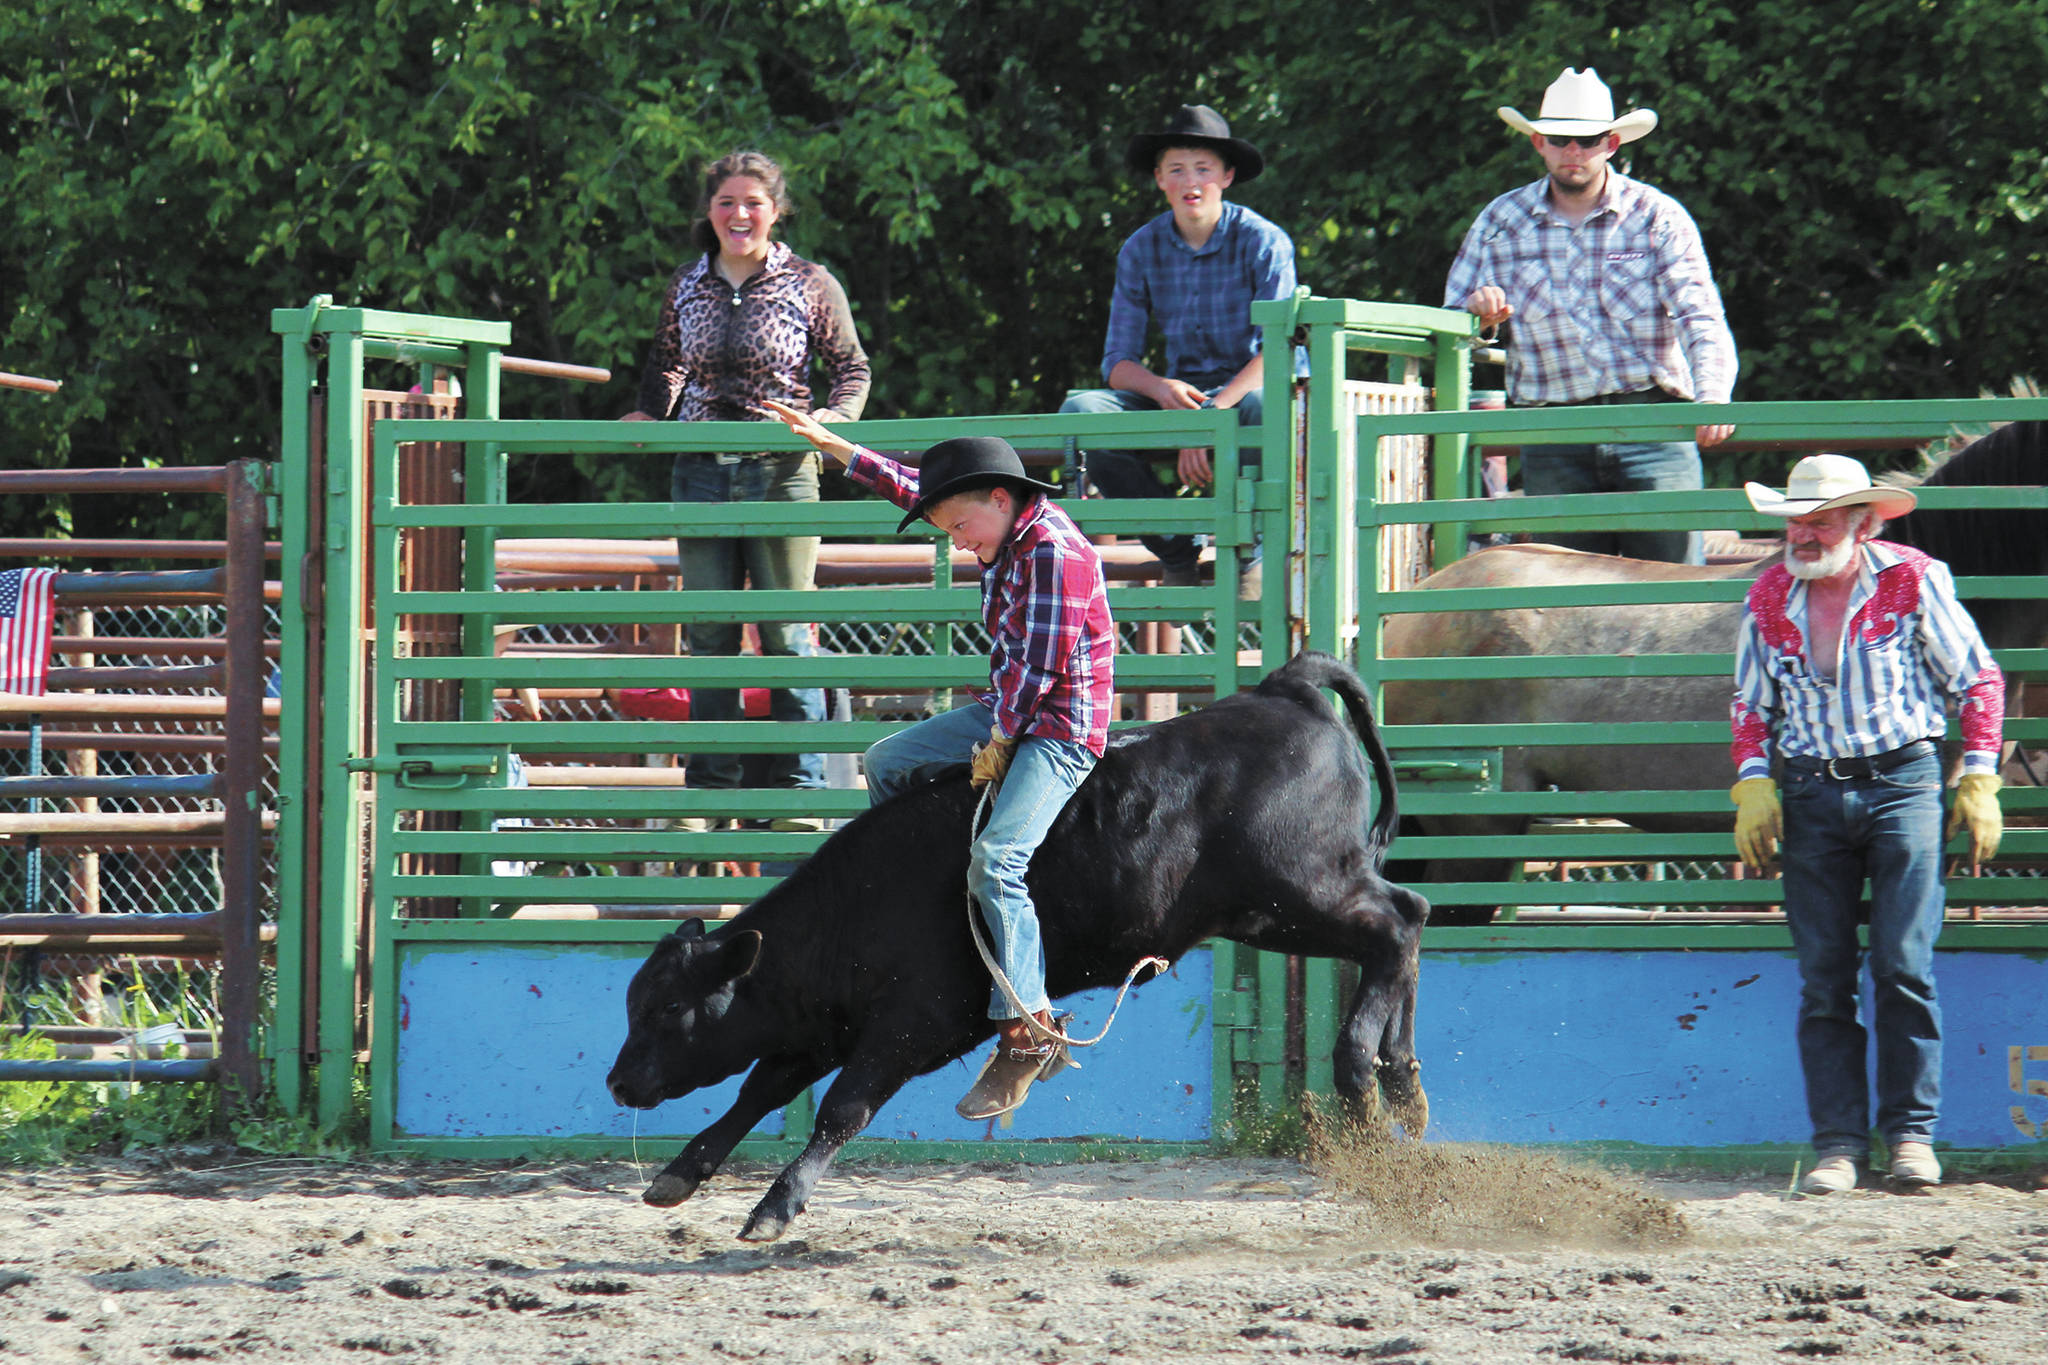 Zephan Jones, of the Homer area, takes a turn riding a bull calf during the 60th annual Ninilchik Rodeo on Saturday, July 4, 2020 at the Kenai Peninsula Fairgrounds in Ninilchik, Alaska. The rodeo lasted throughout the July Fourth holiday and celebrated a return to the event’s roots. (Photo by Megan Pacer/Homer News)